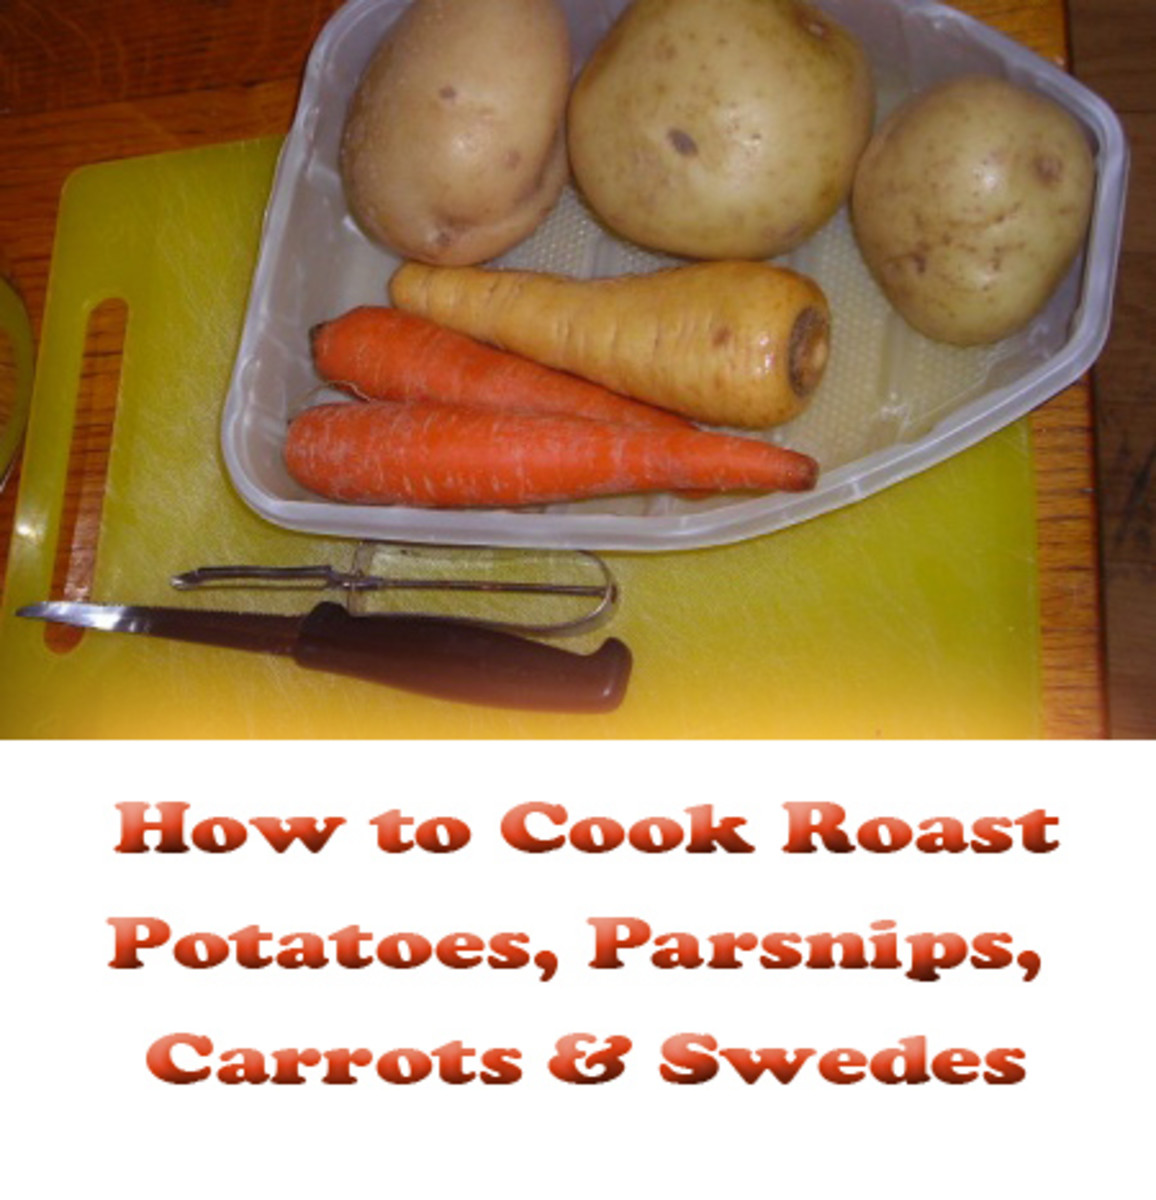 How to Cook Vegetables Like Potatoes, Carrots and Parsnips for a Celebration Dinner